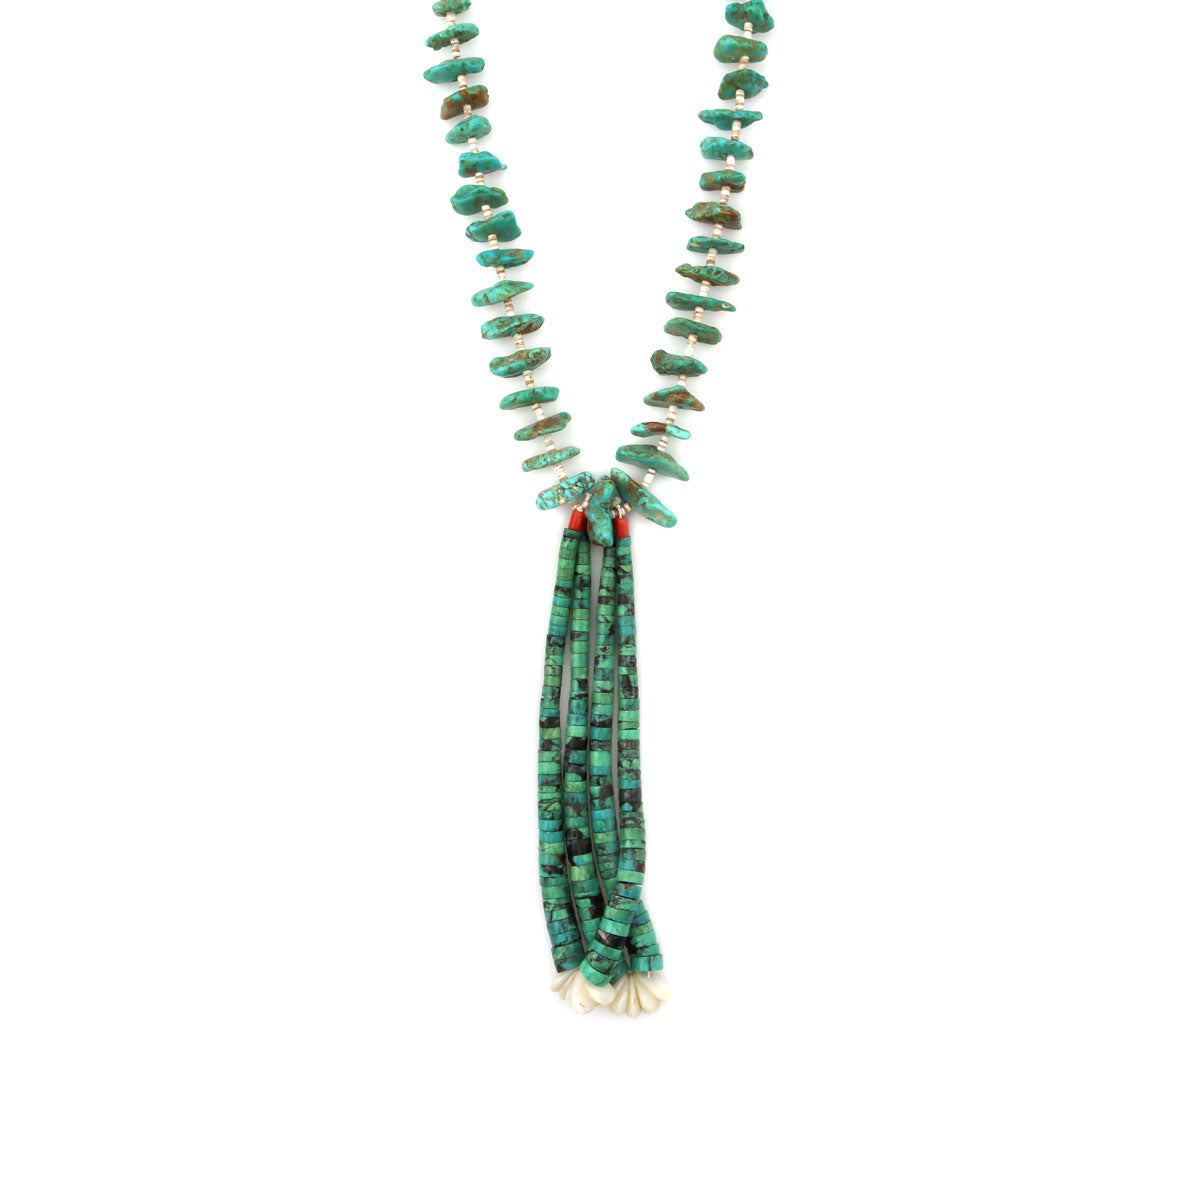 Navajo Turquoise Nugget and Heishi Necklace with Jocla Pendants c. 1960s, 30" length (J91993C-0921-016)1